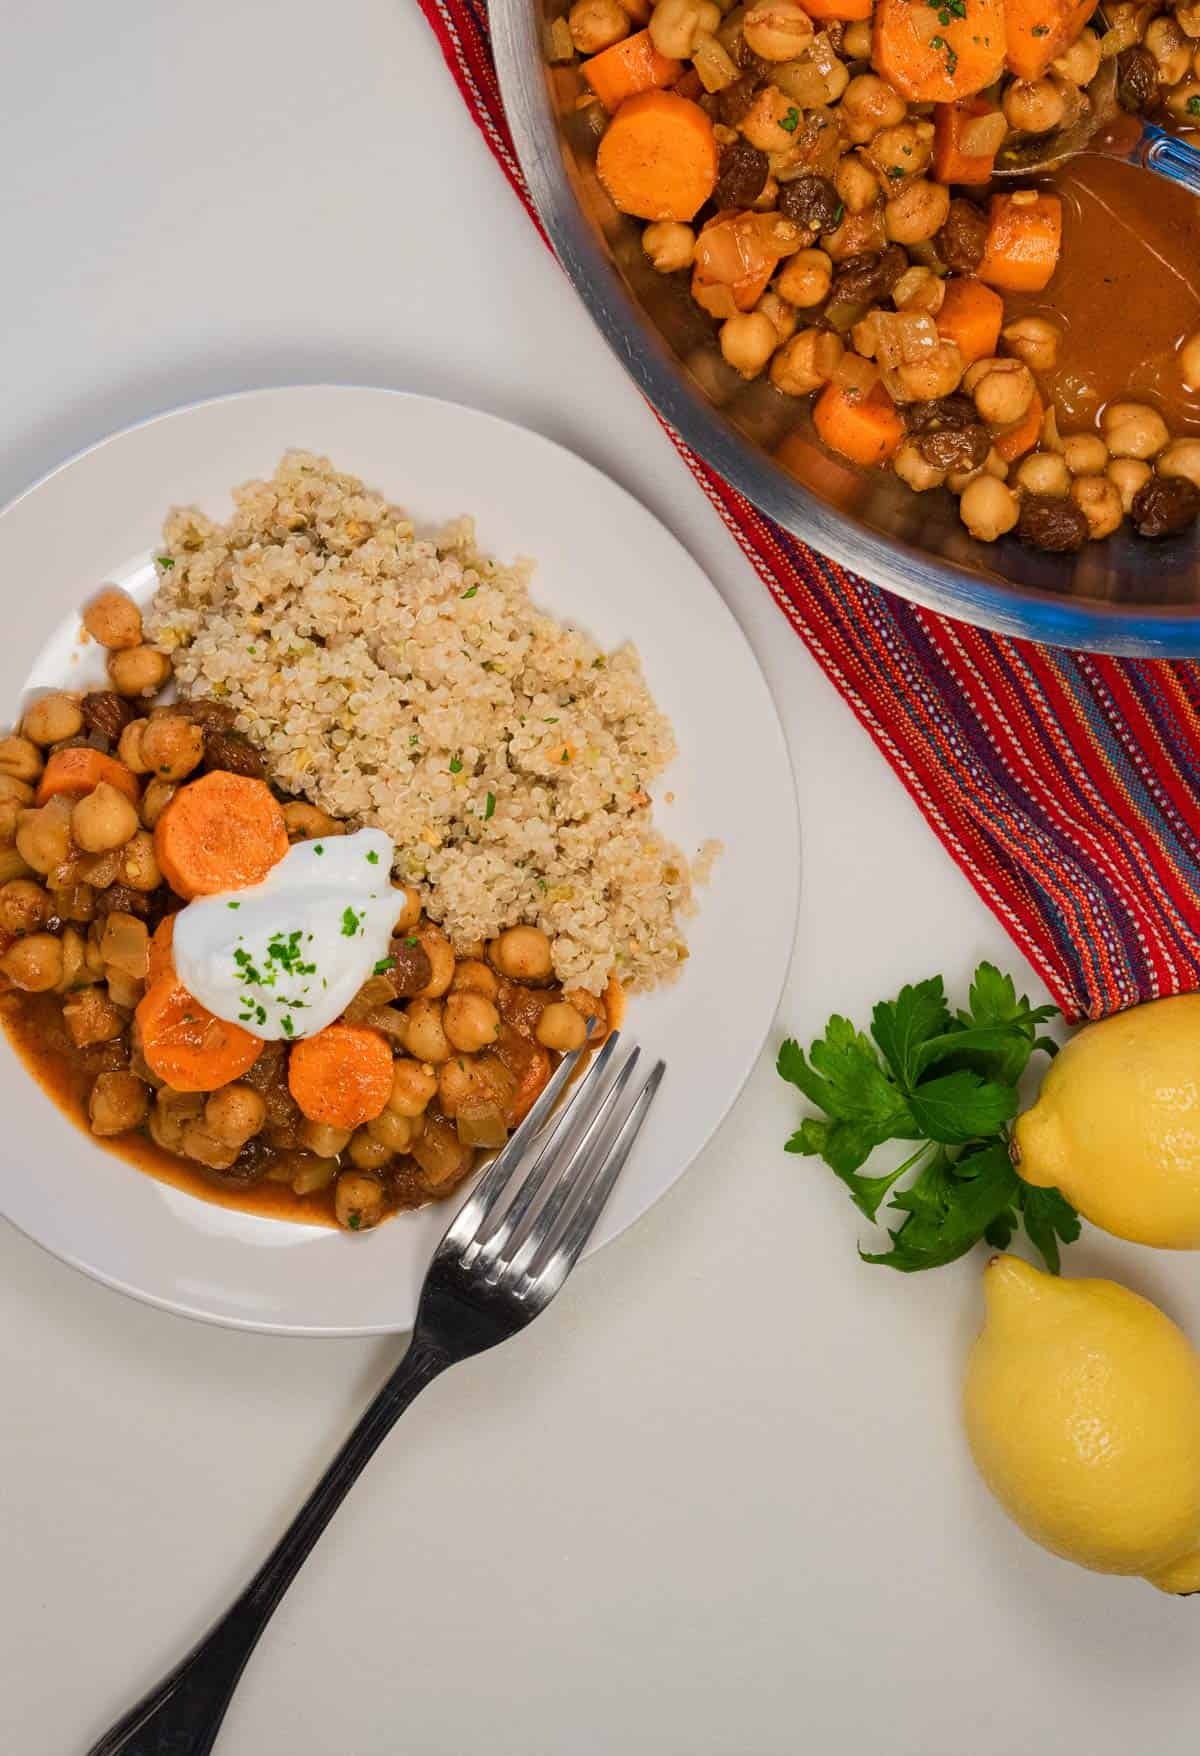 Overhead shot of a dish of Moroccan Chickpea Tagine plated with a fork